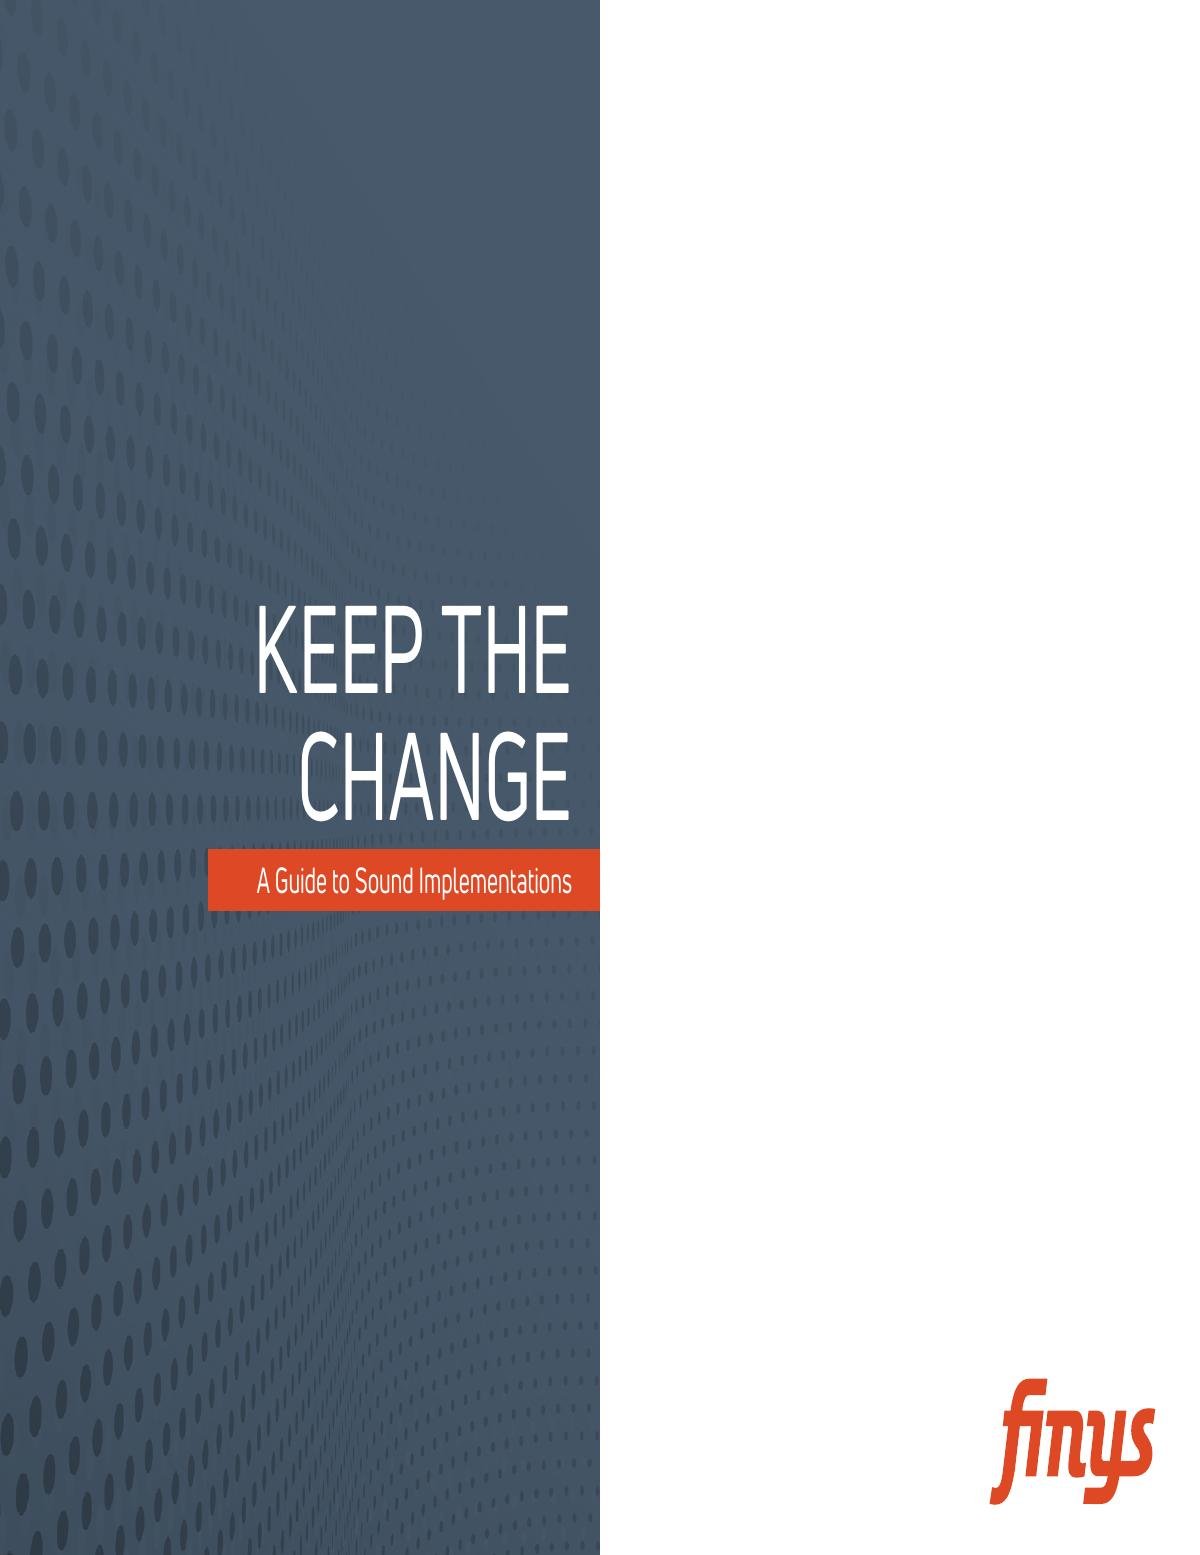 Keep the Change: A Guide to Sound Implementations